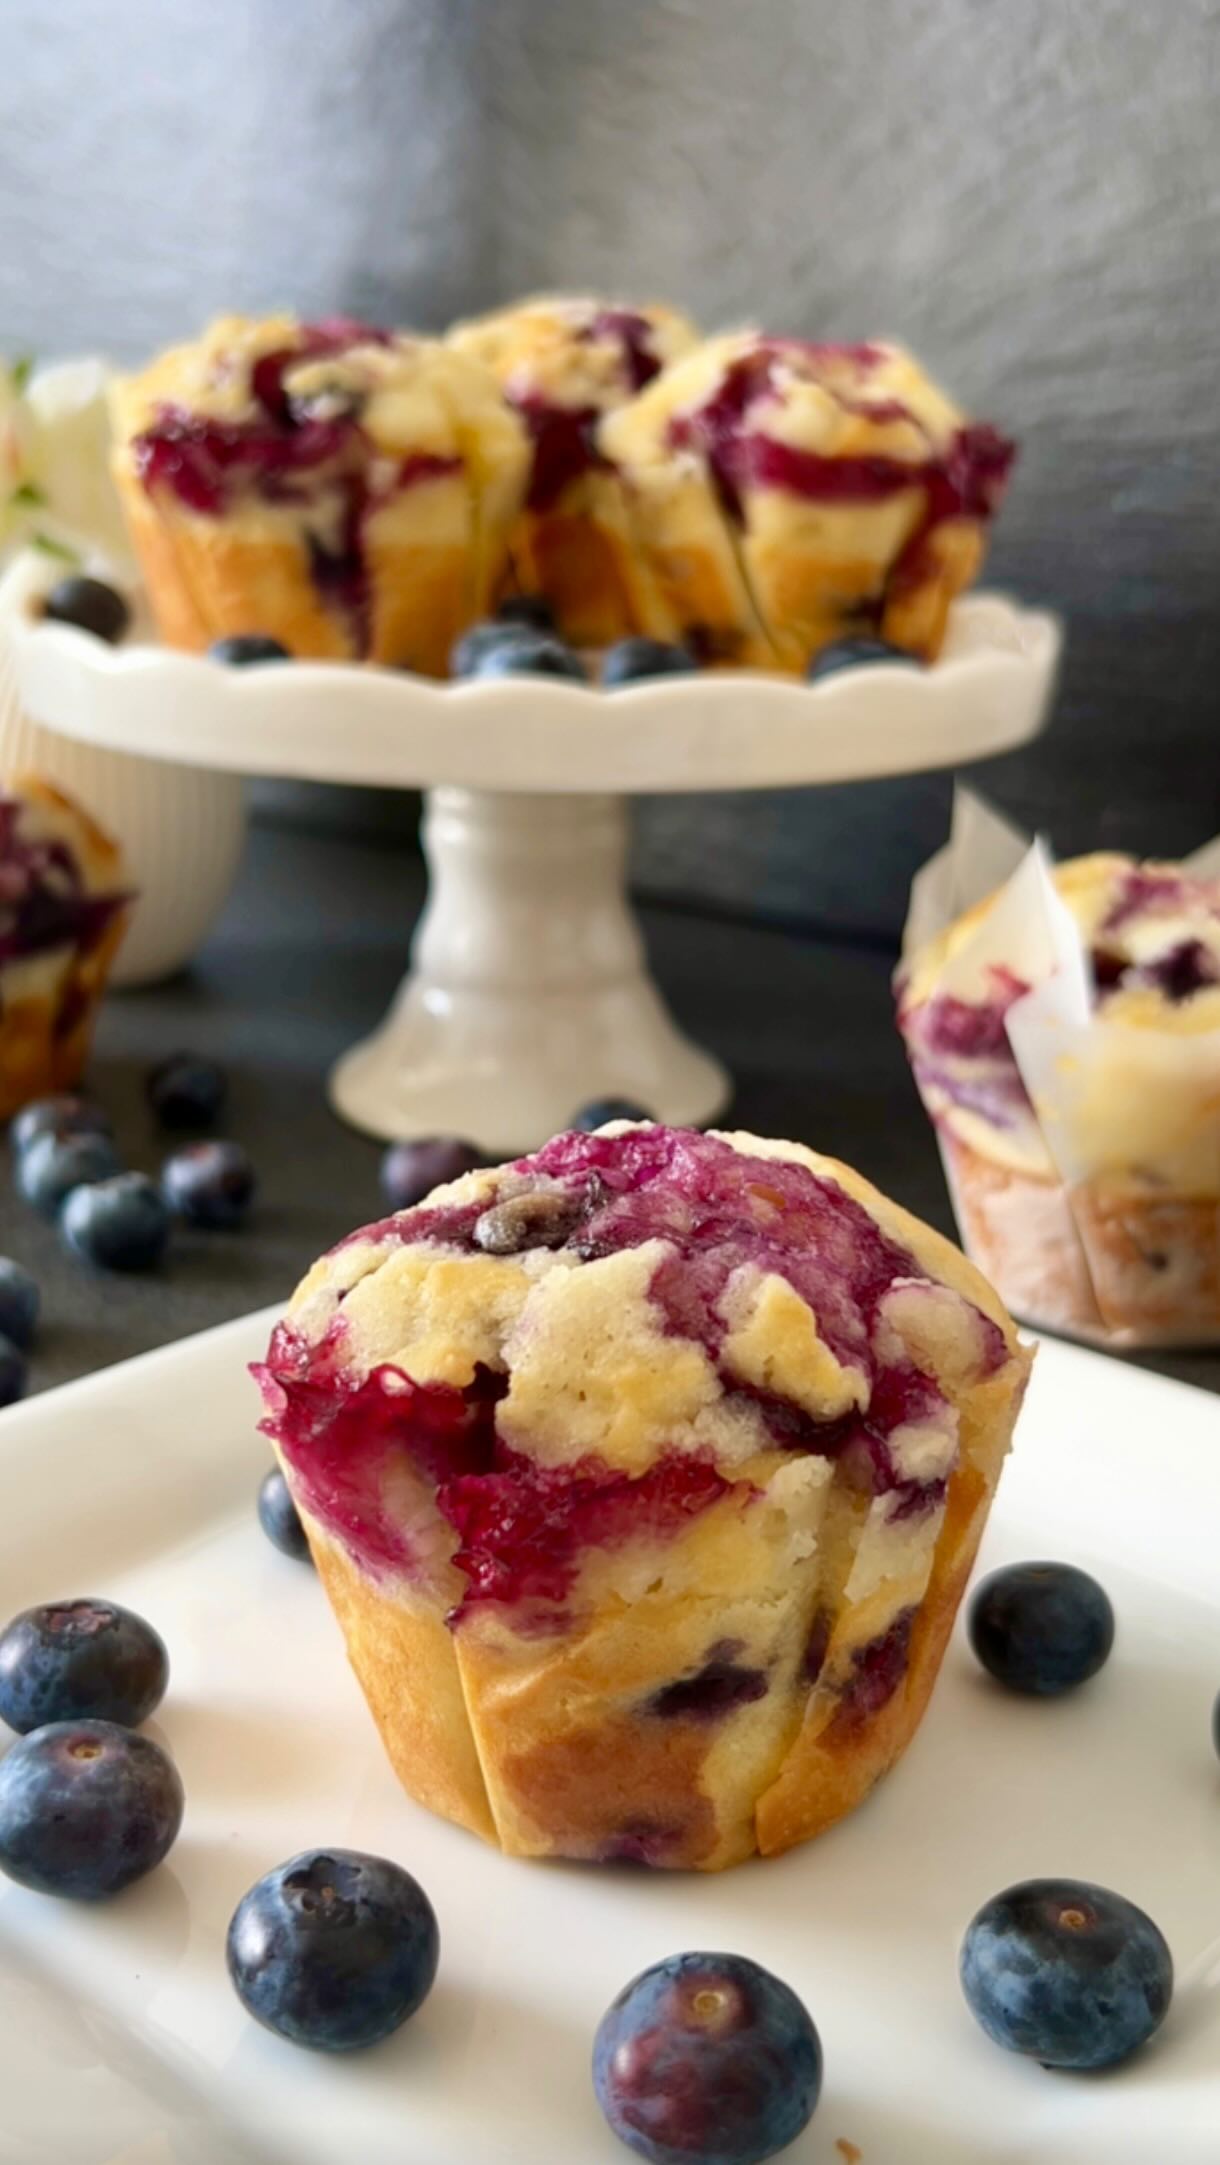 American Blueberry Muffins, a bakery near me